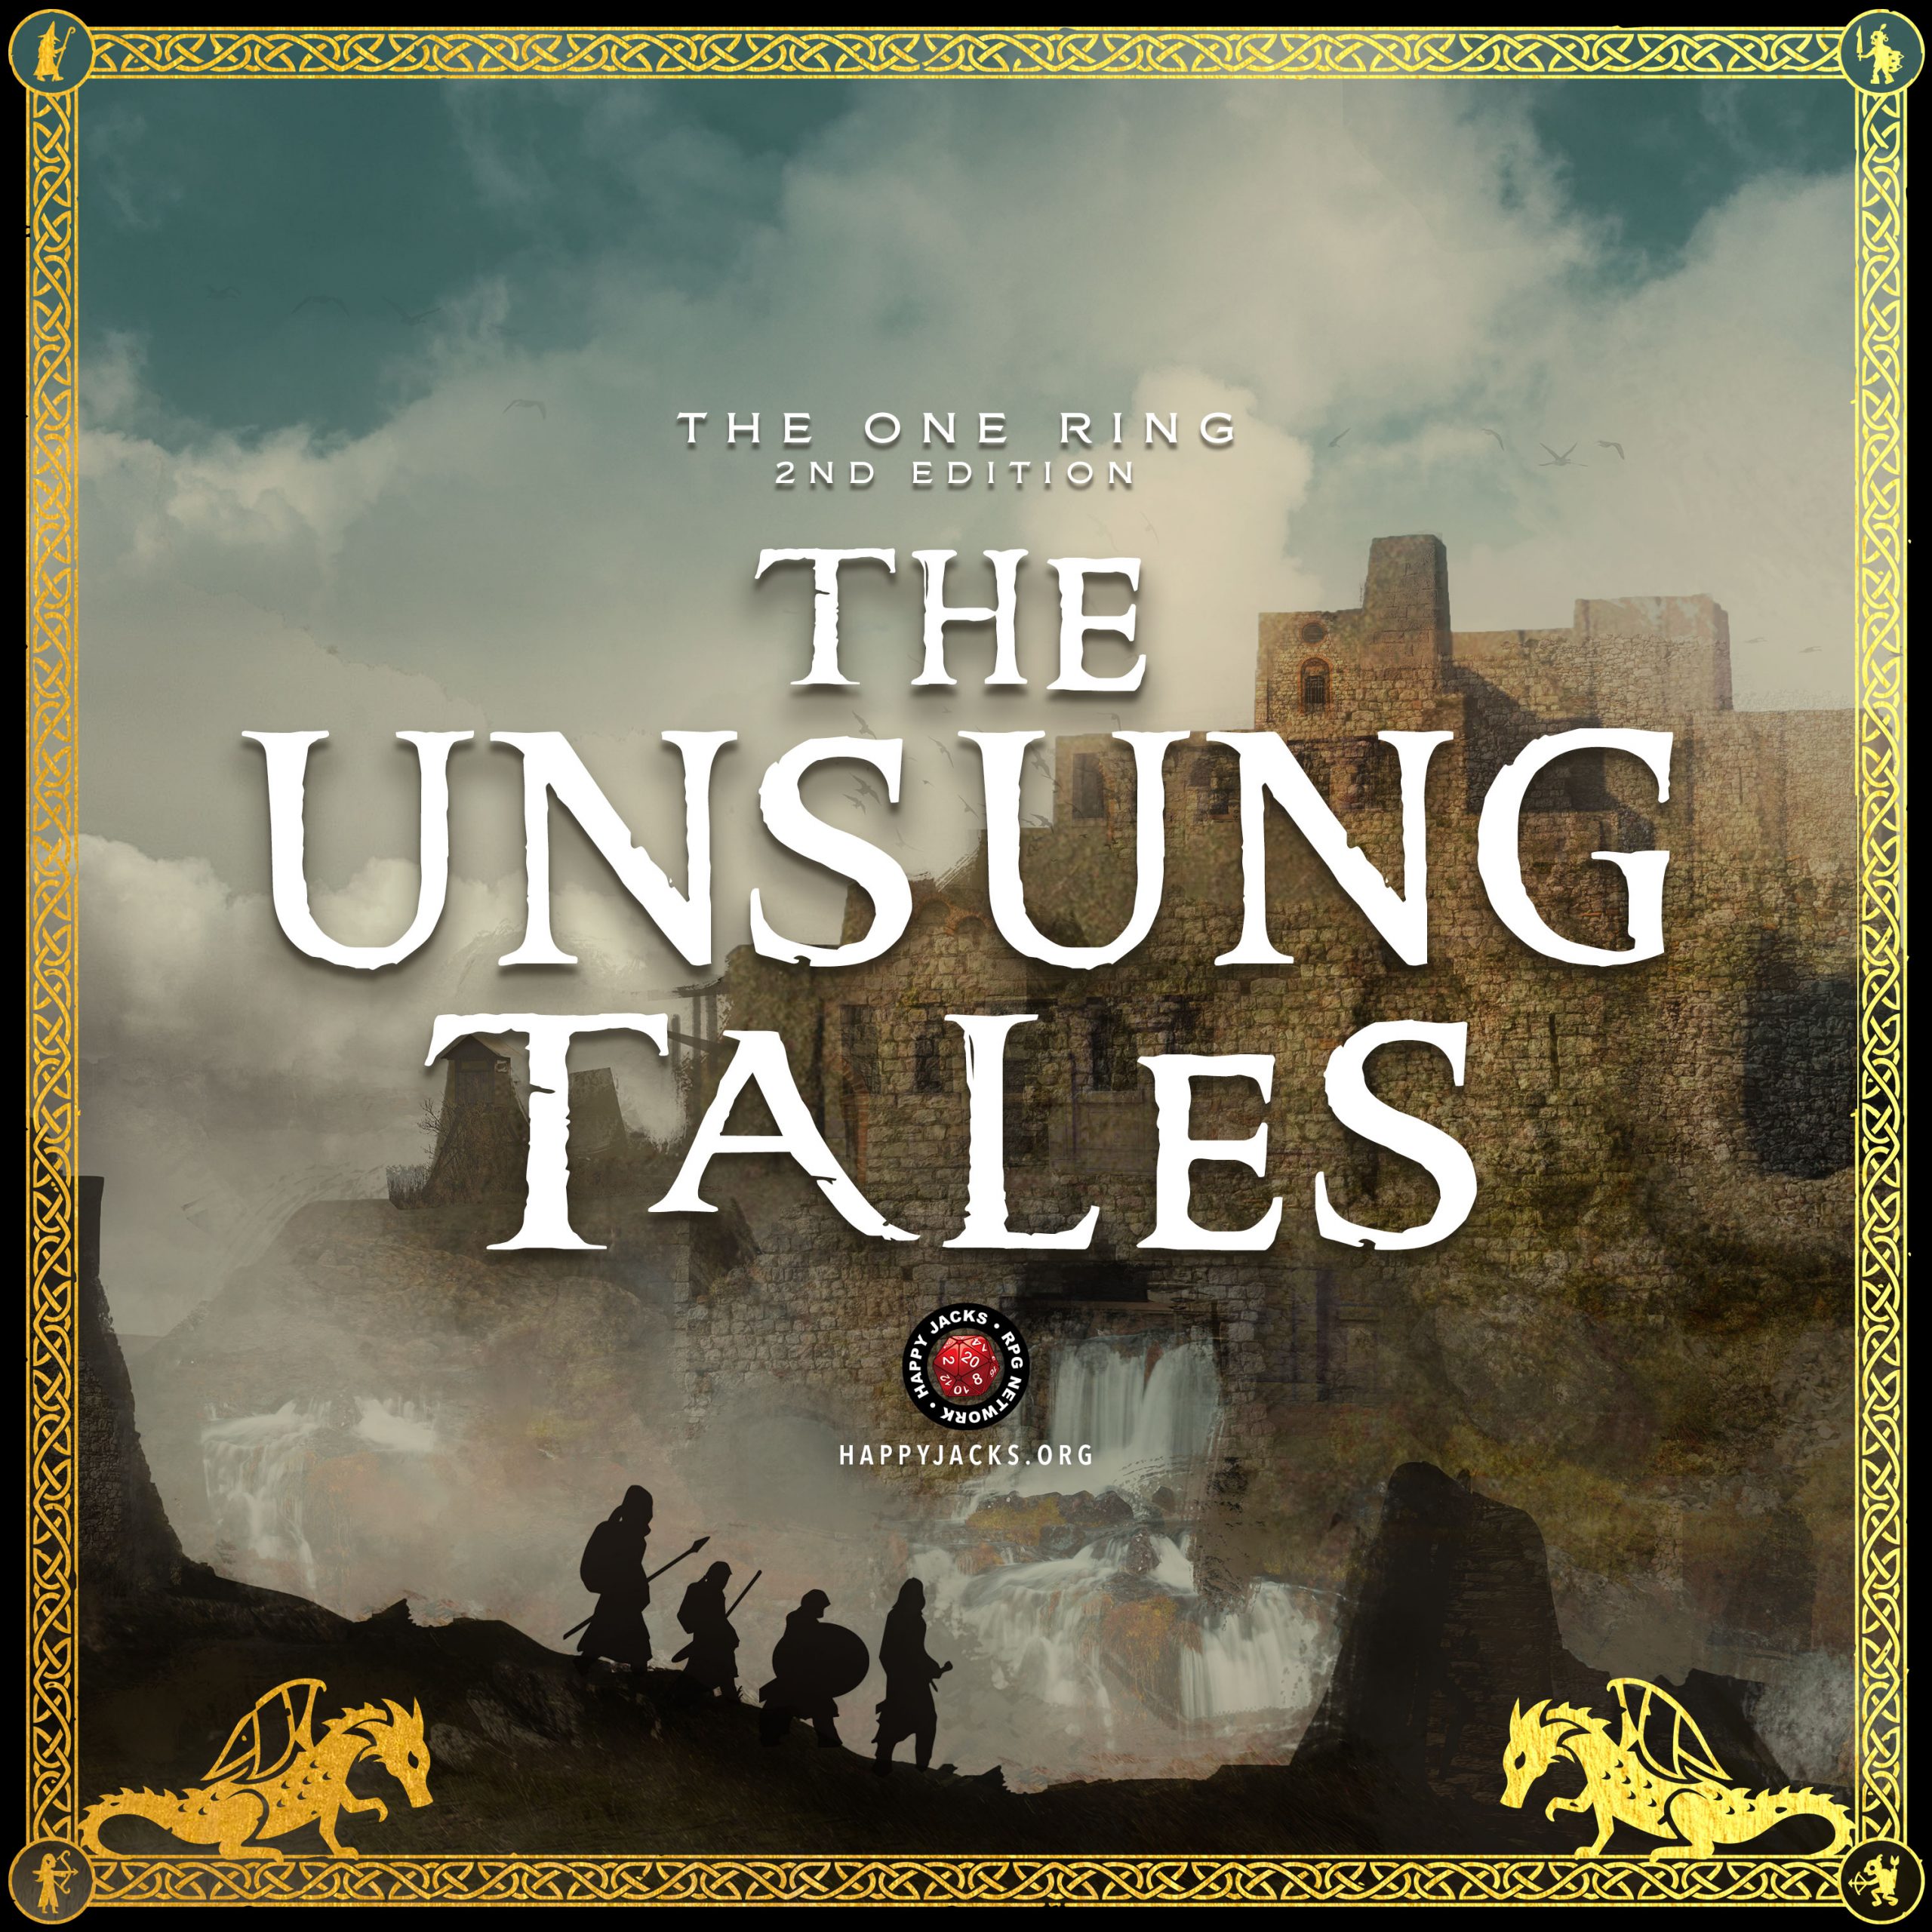 UNSUNG10 Dark Truths | The Unsung Tales | The One Ring 2e